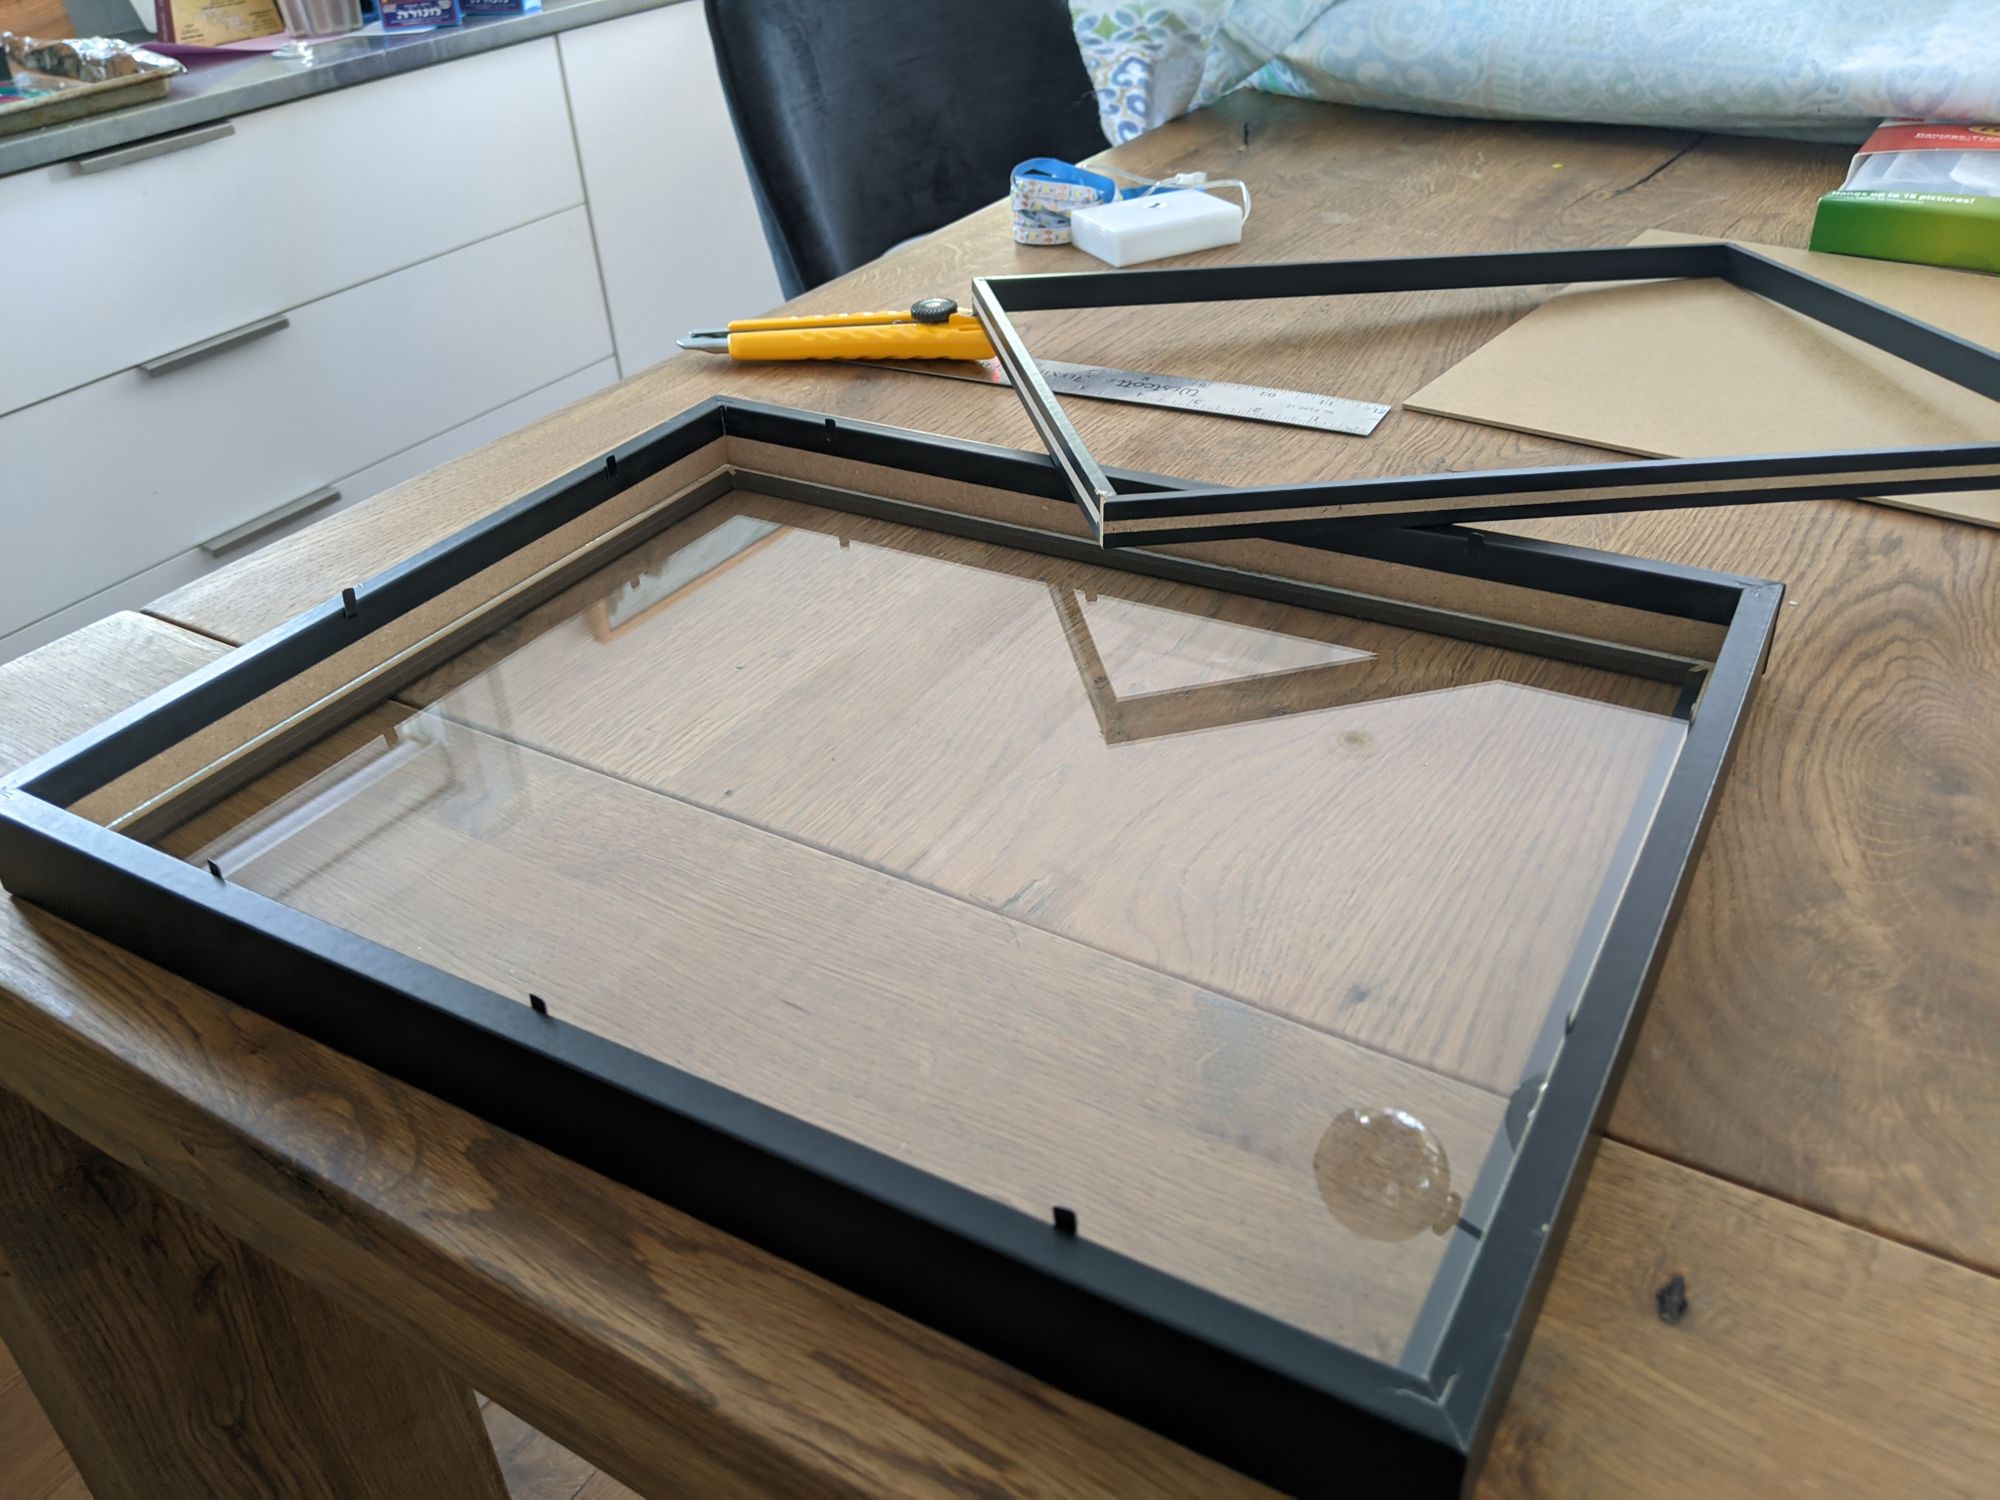 How to Make a Battery-Powered Lightbox Photo Frame